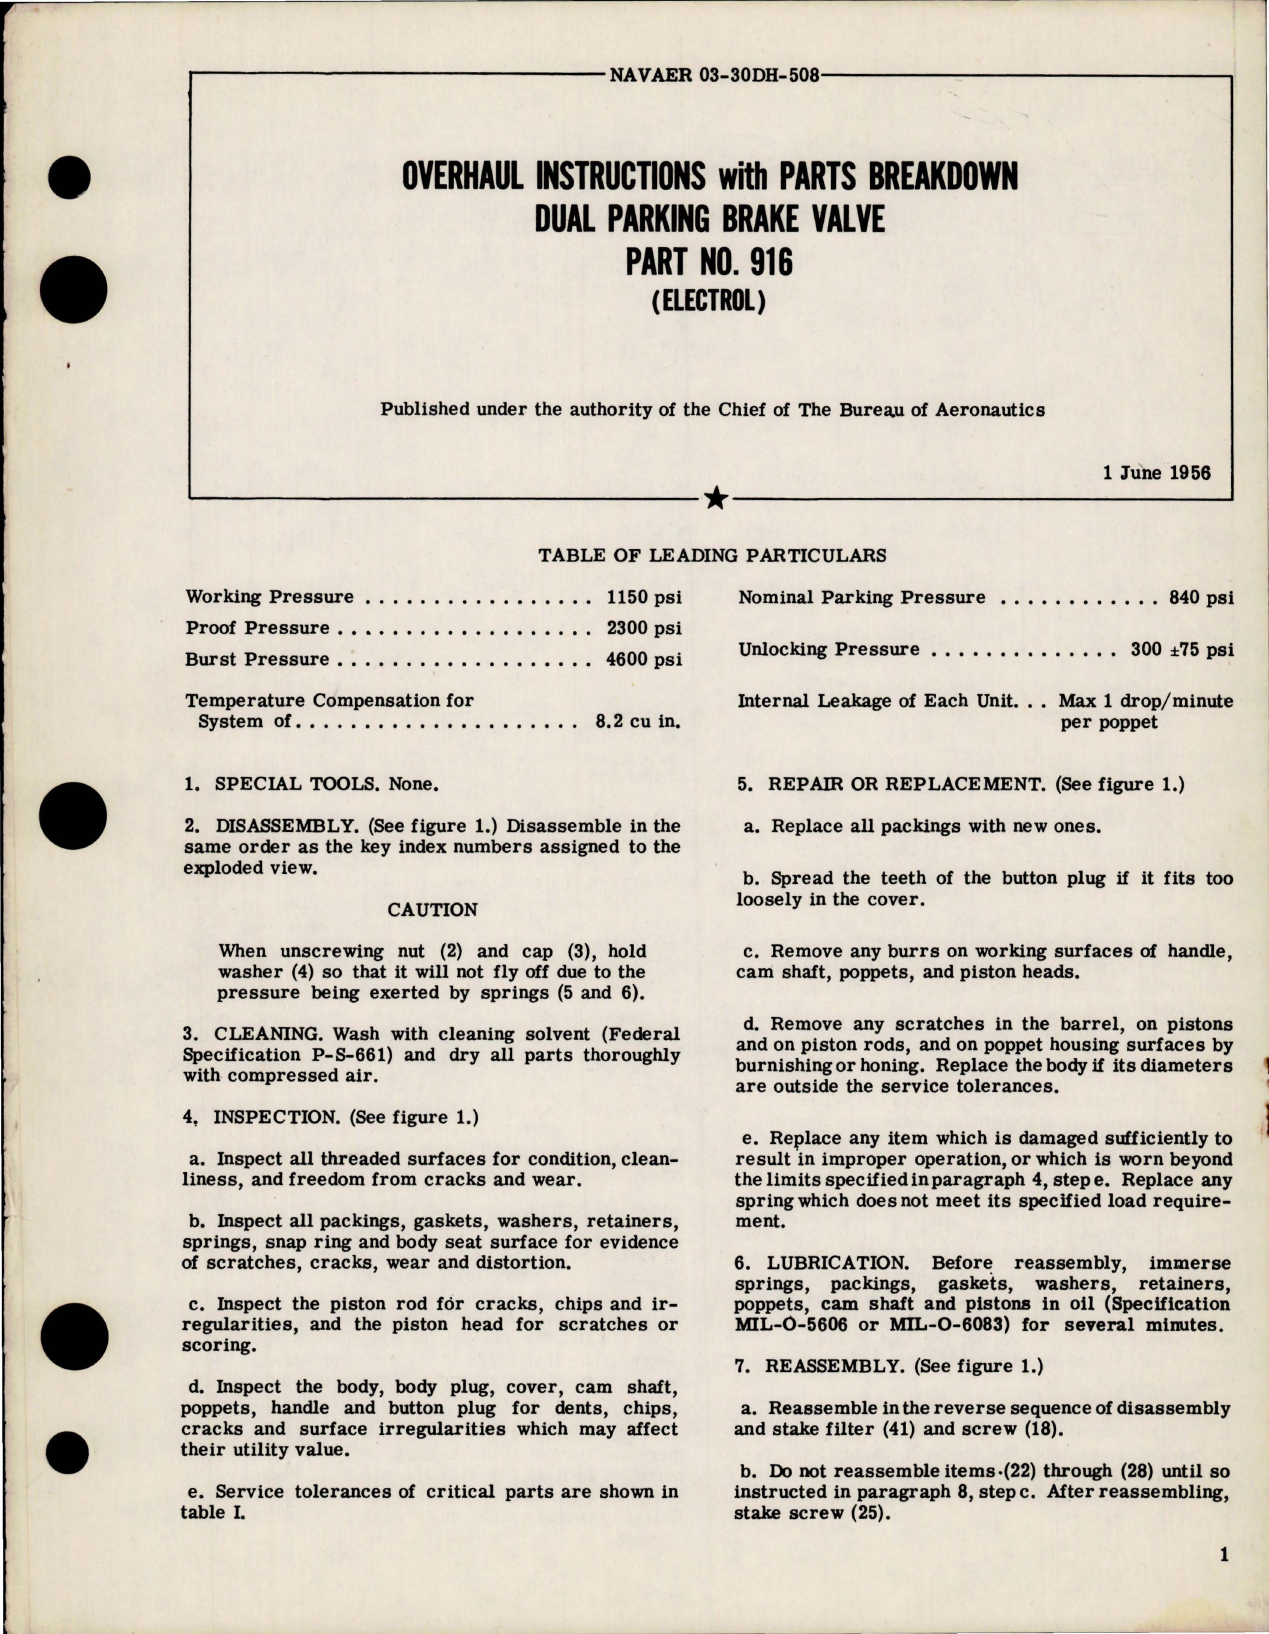 Sample page 1 from AirCorps Library document: Overhaul Instructions with Parts Breakdown for Dual Parking Brake Valve - Part 916 